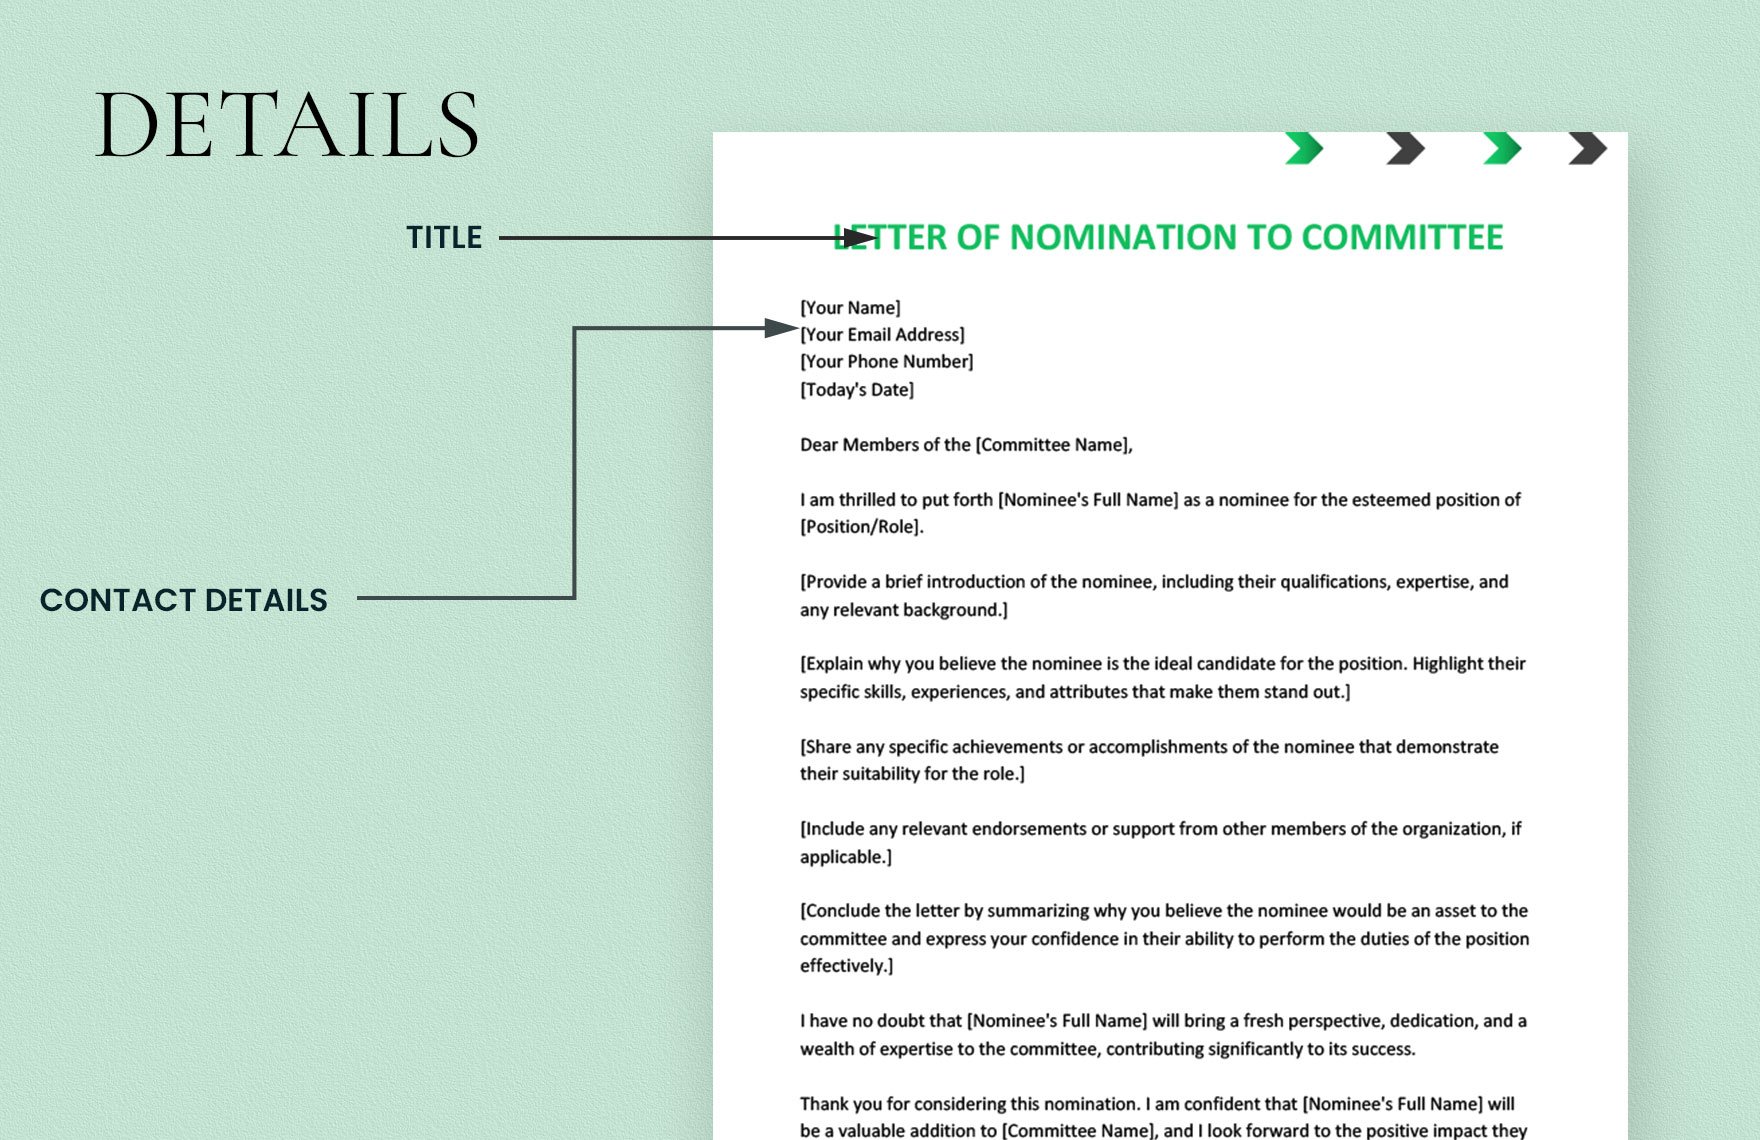 Letter of Nomination to Committee